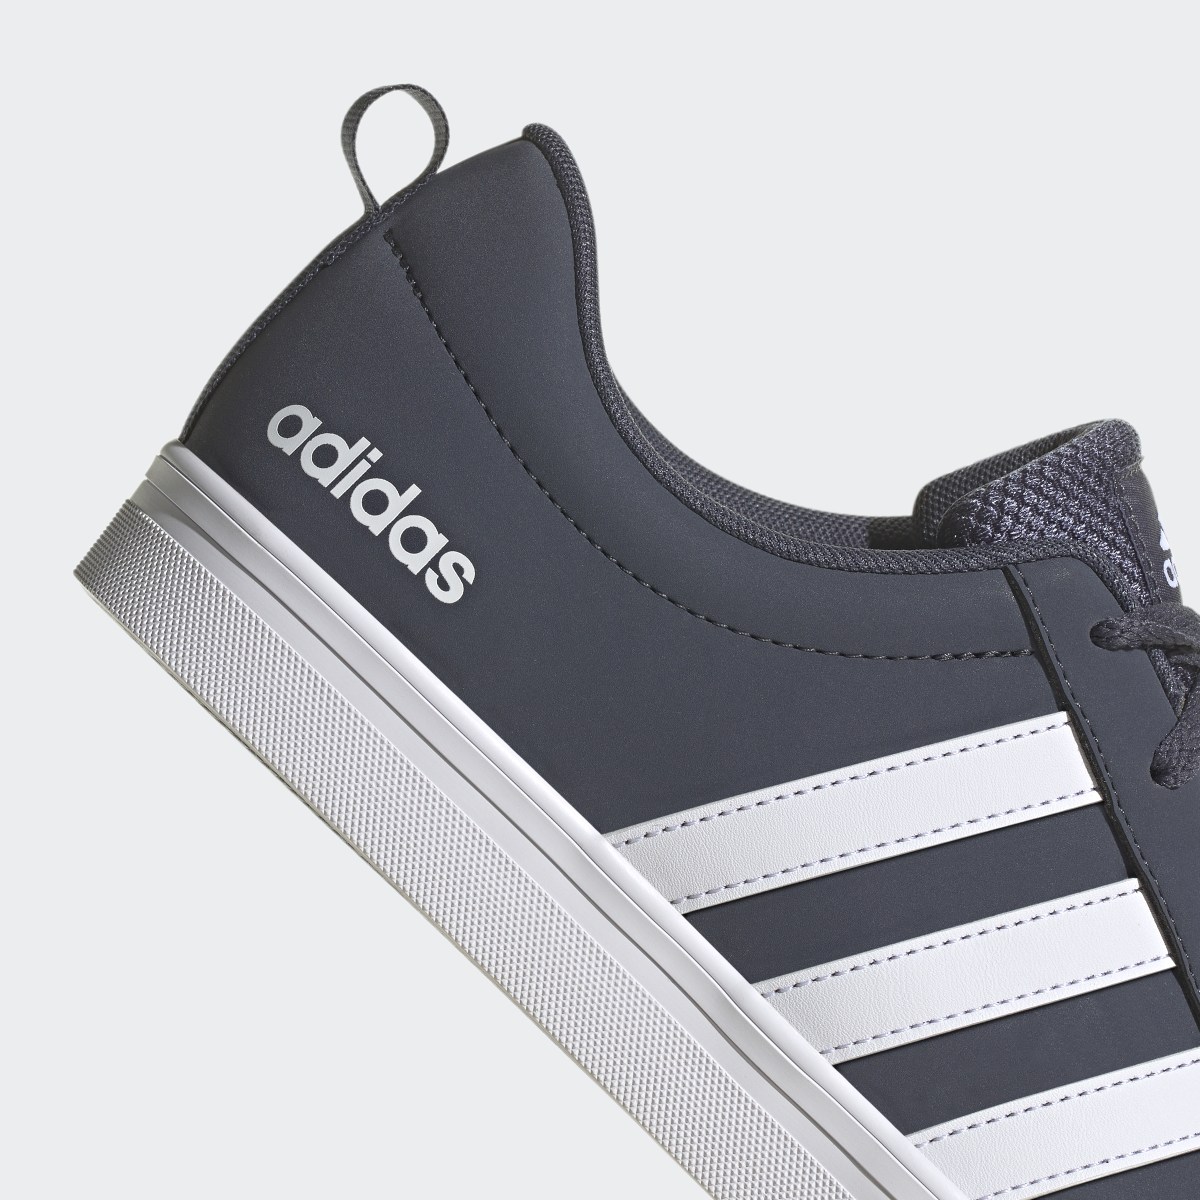 Adidas VS Pace 2.0 Shoes. 9